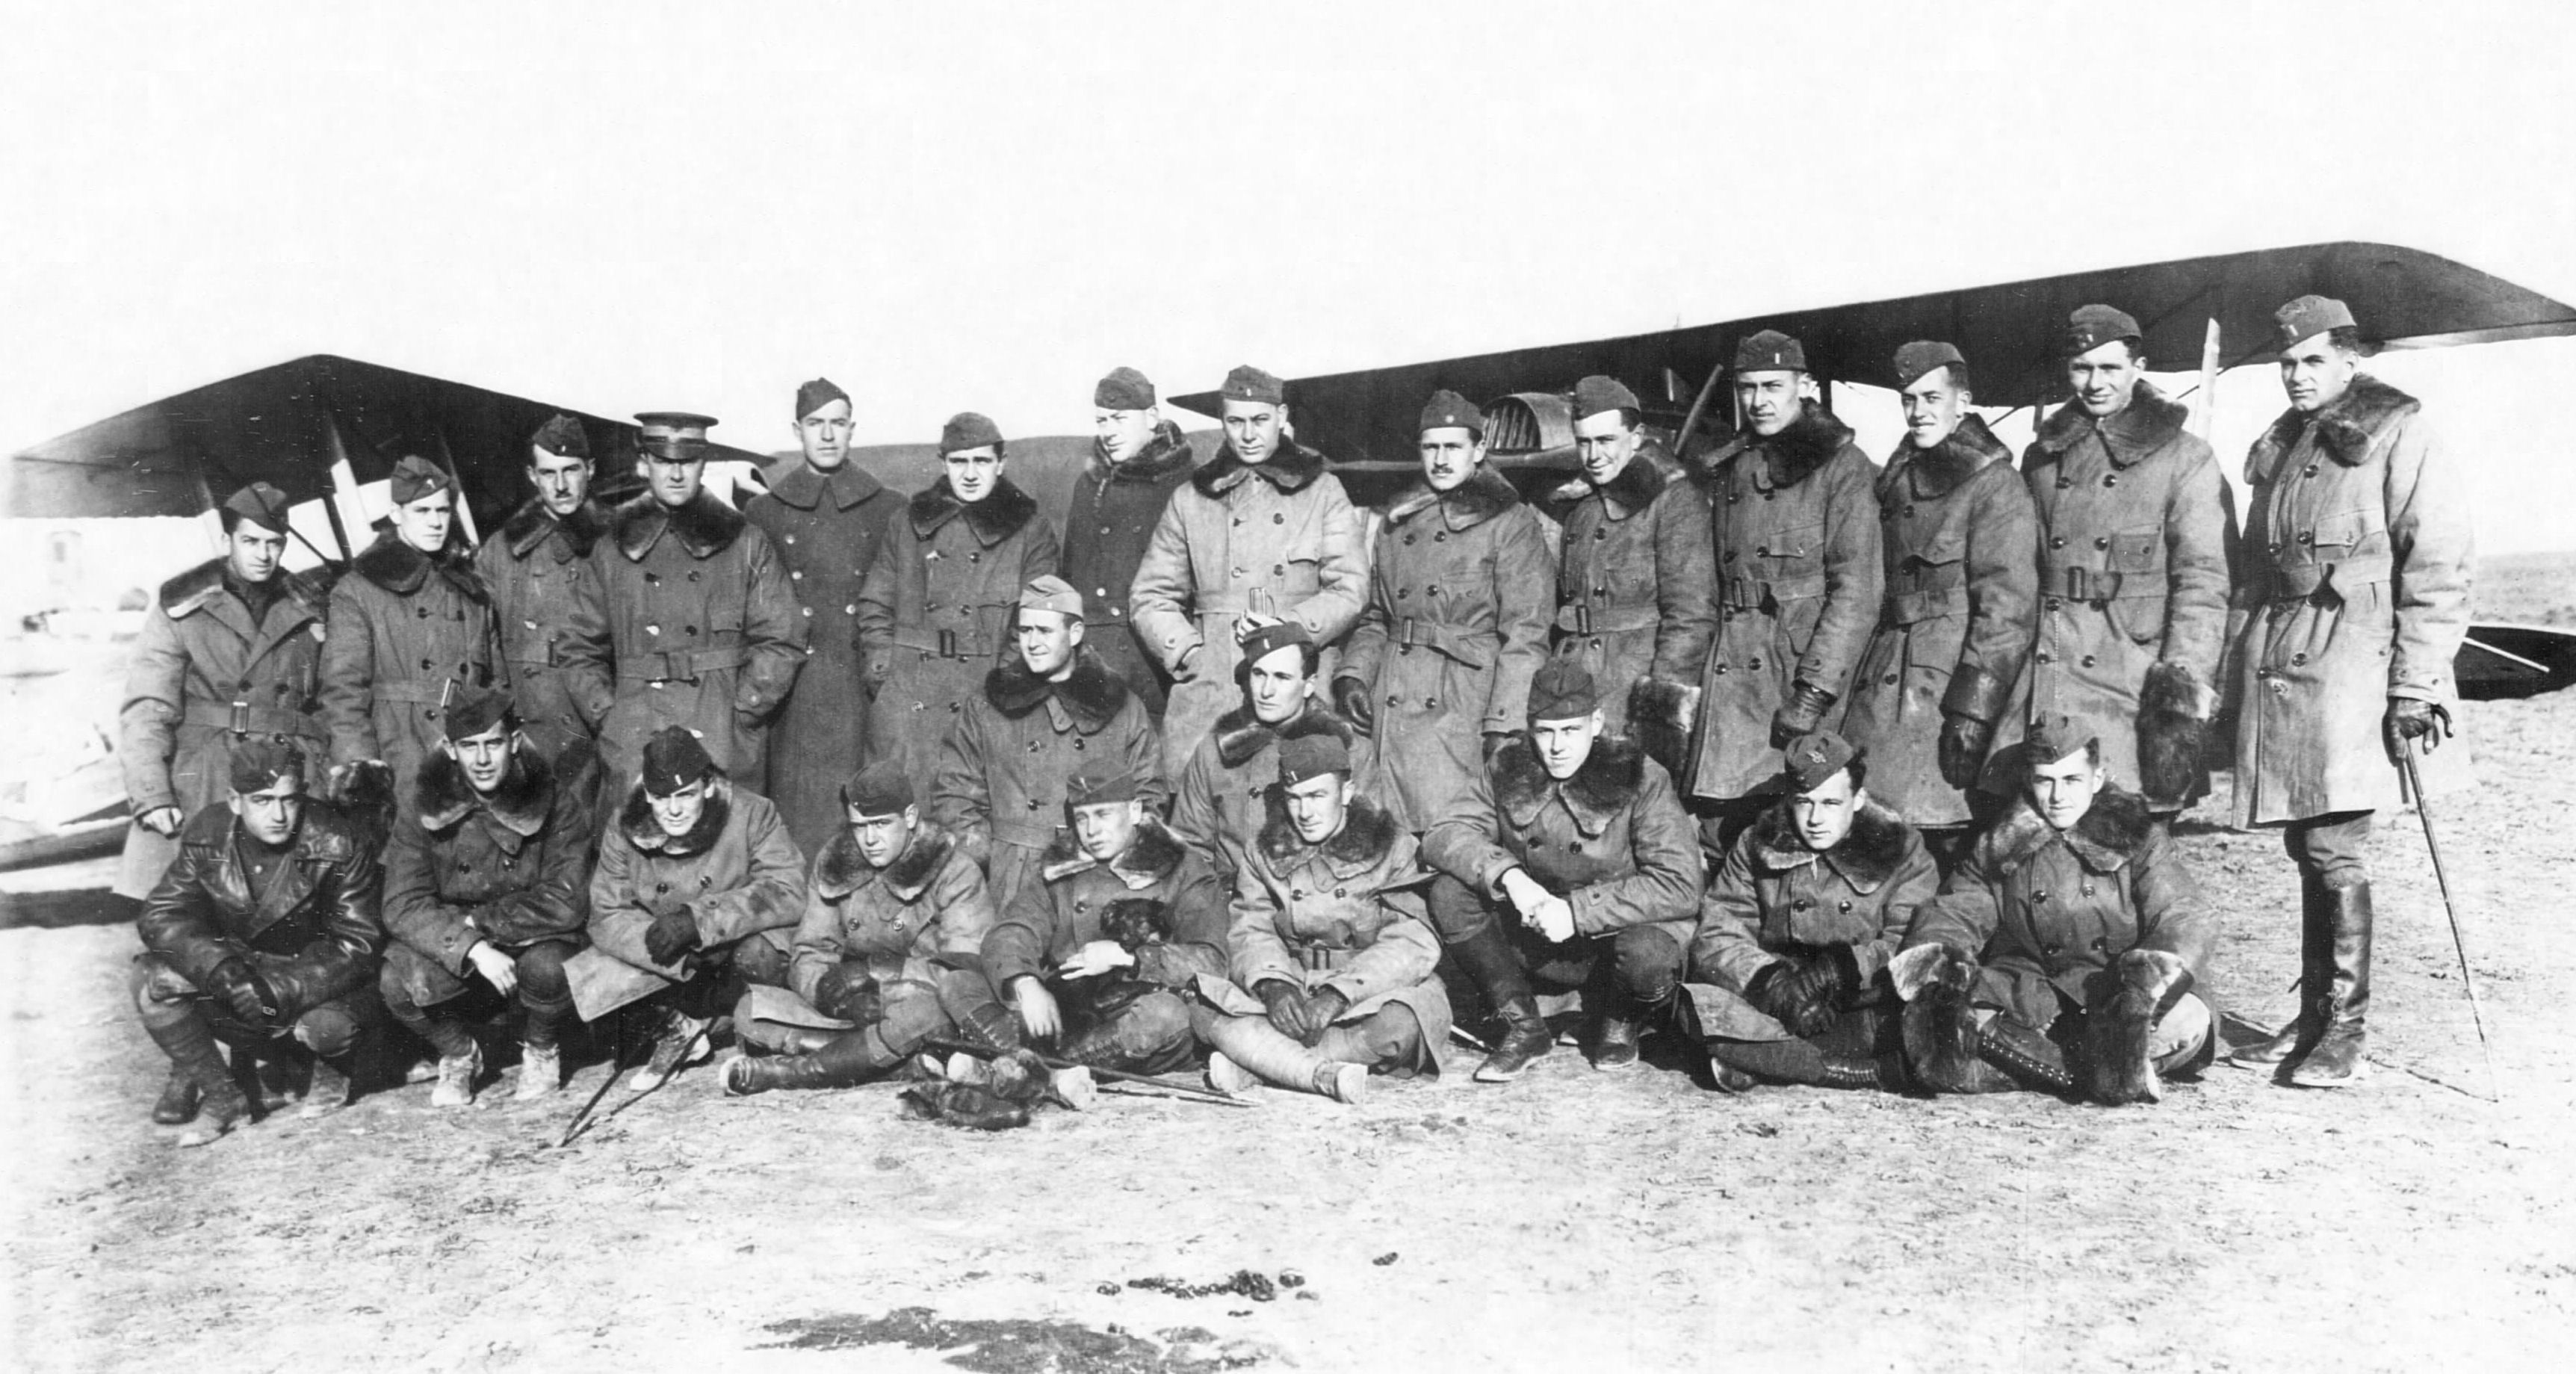 Officers of the 139th Aero Squadron, at Belrain Aerodrome, France, November 1918. 1st Lieutenant Russell L. Maughan is at the center of the photograph, kneeling, in the second row. (U.S. Air Force)